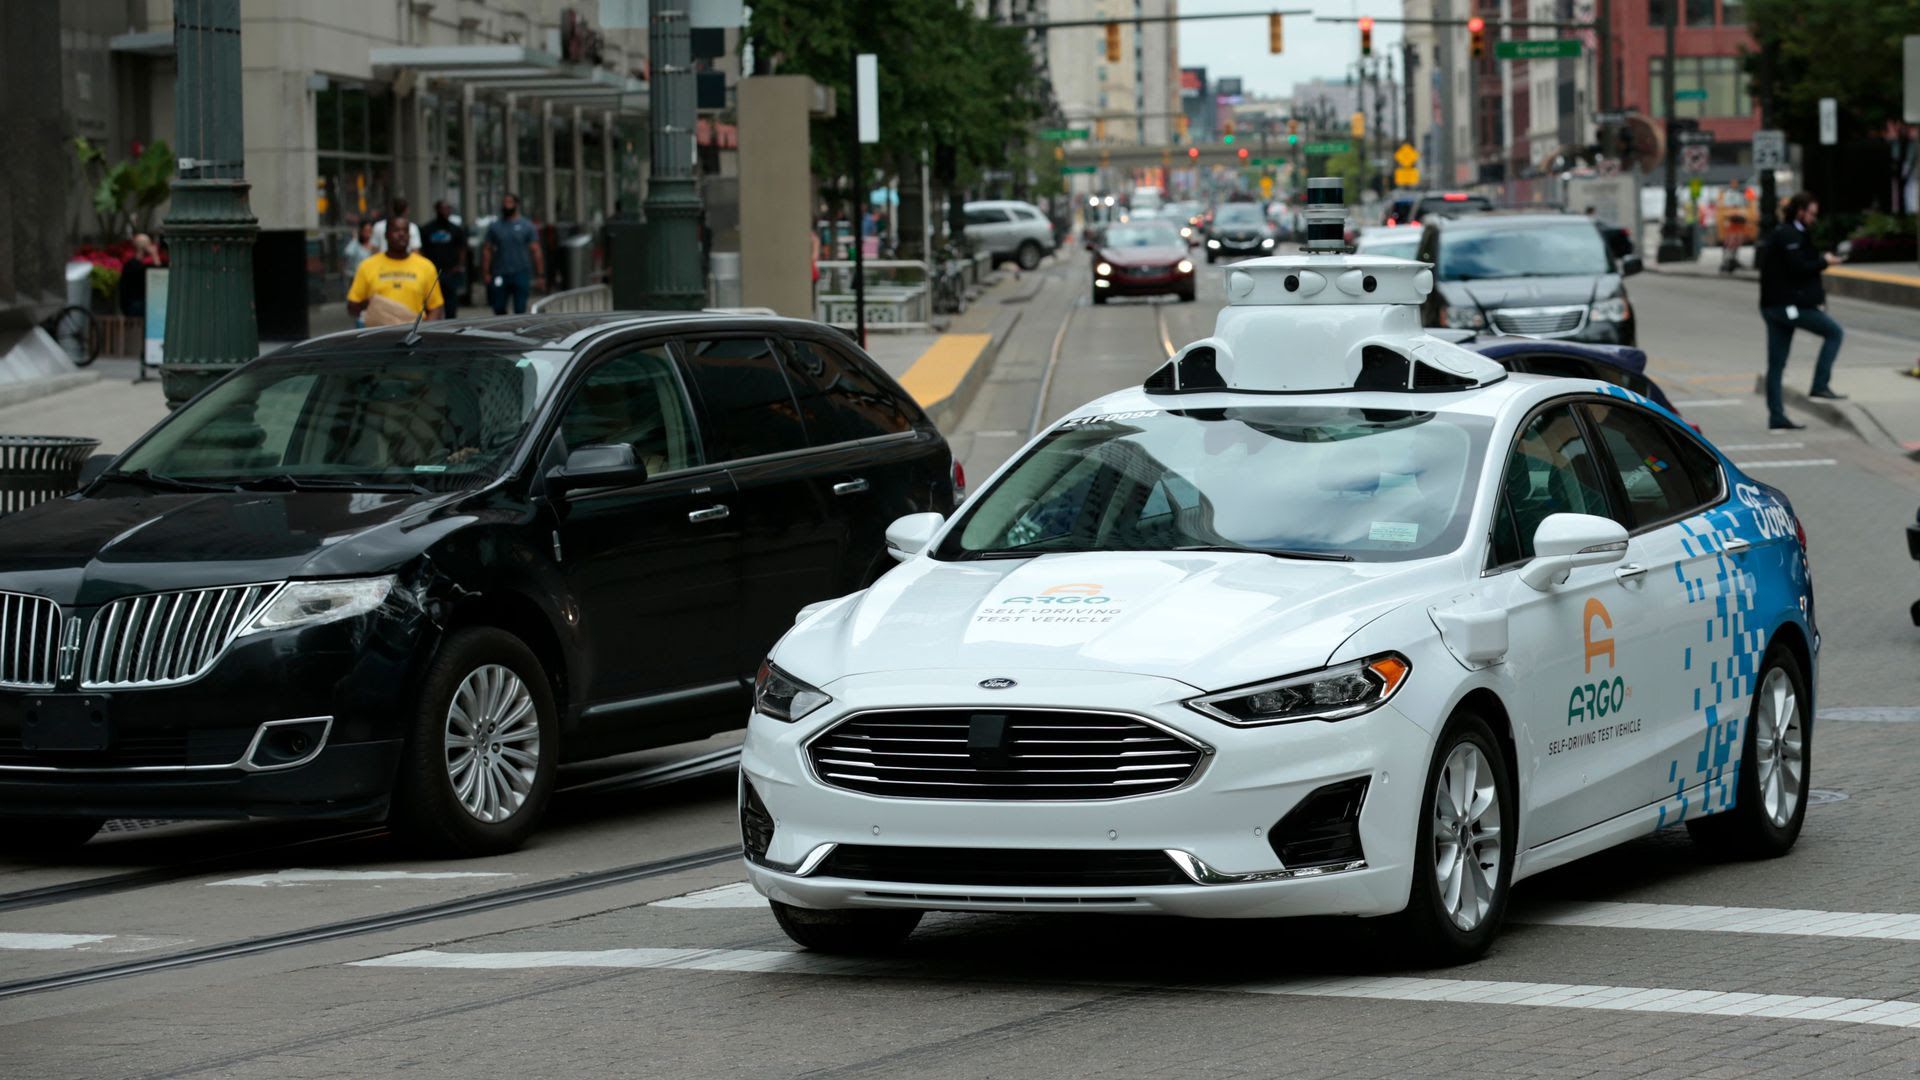 A Ford Argo AI test vehicle being tested in downtown Detroit